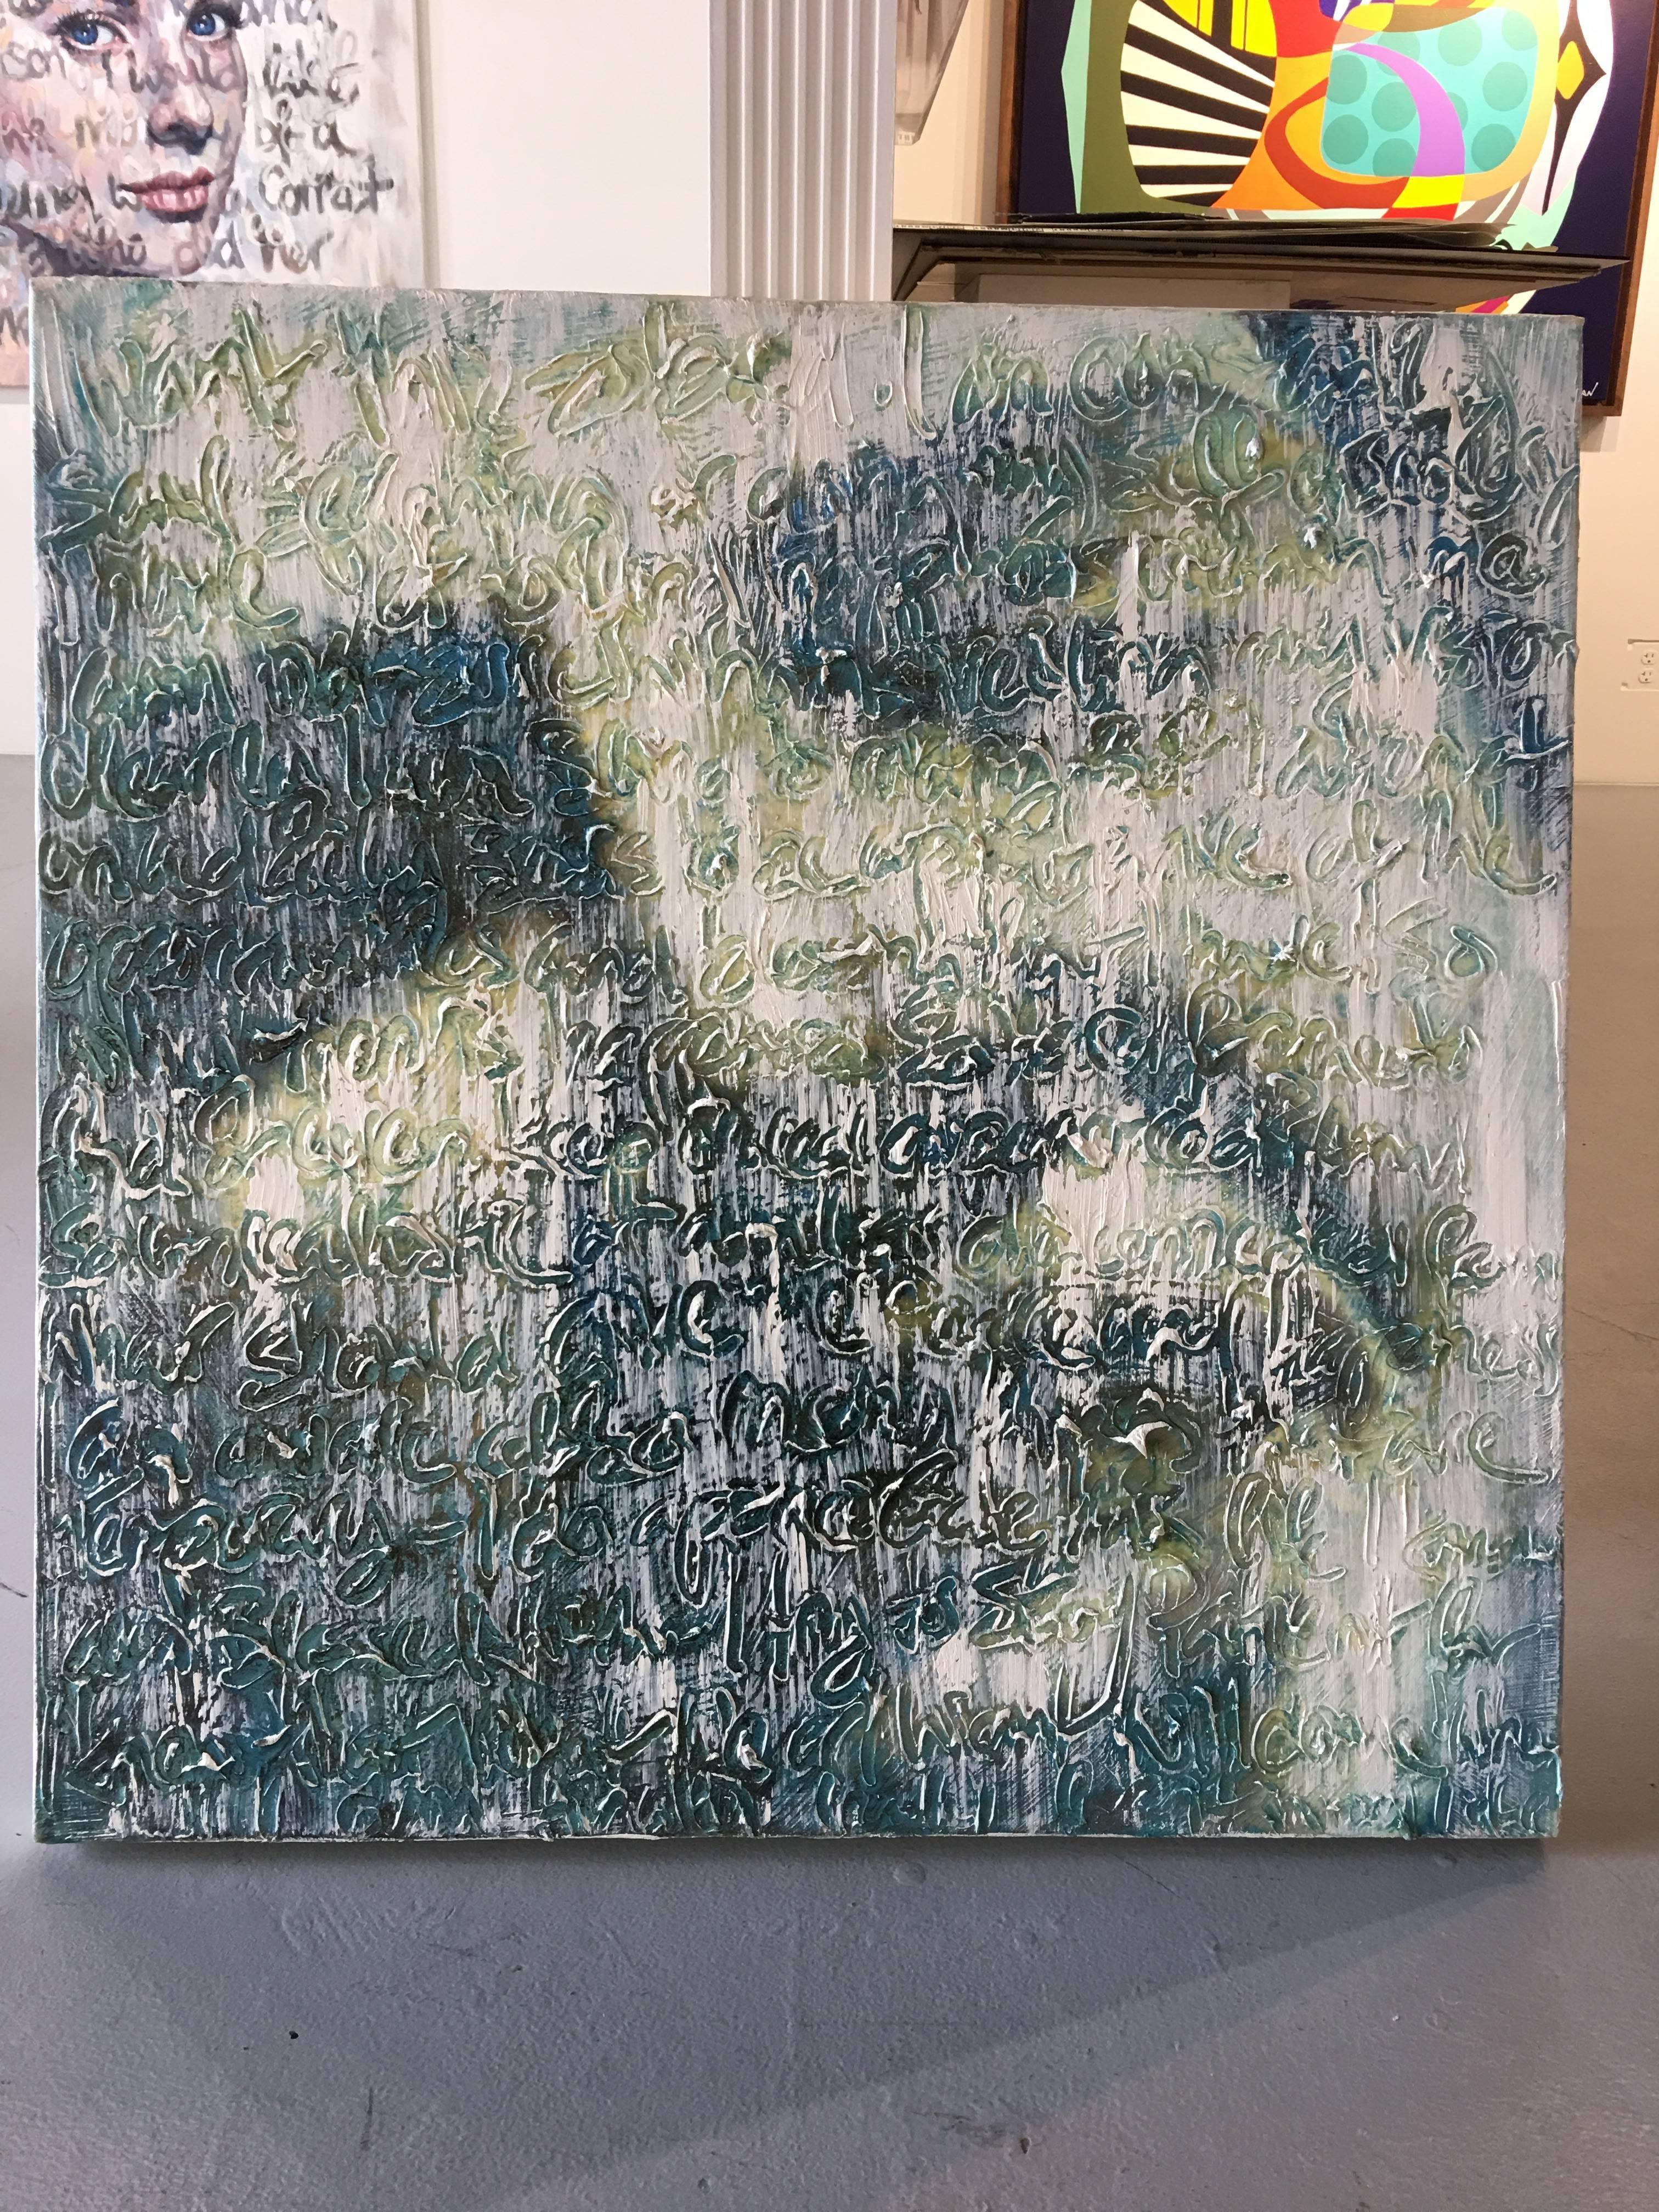 Original Oil on Canvas Titled “Yang” - Painting by Christina Major